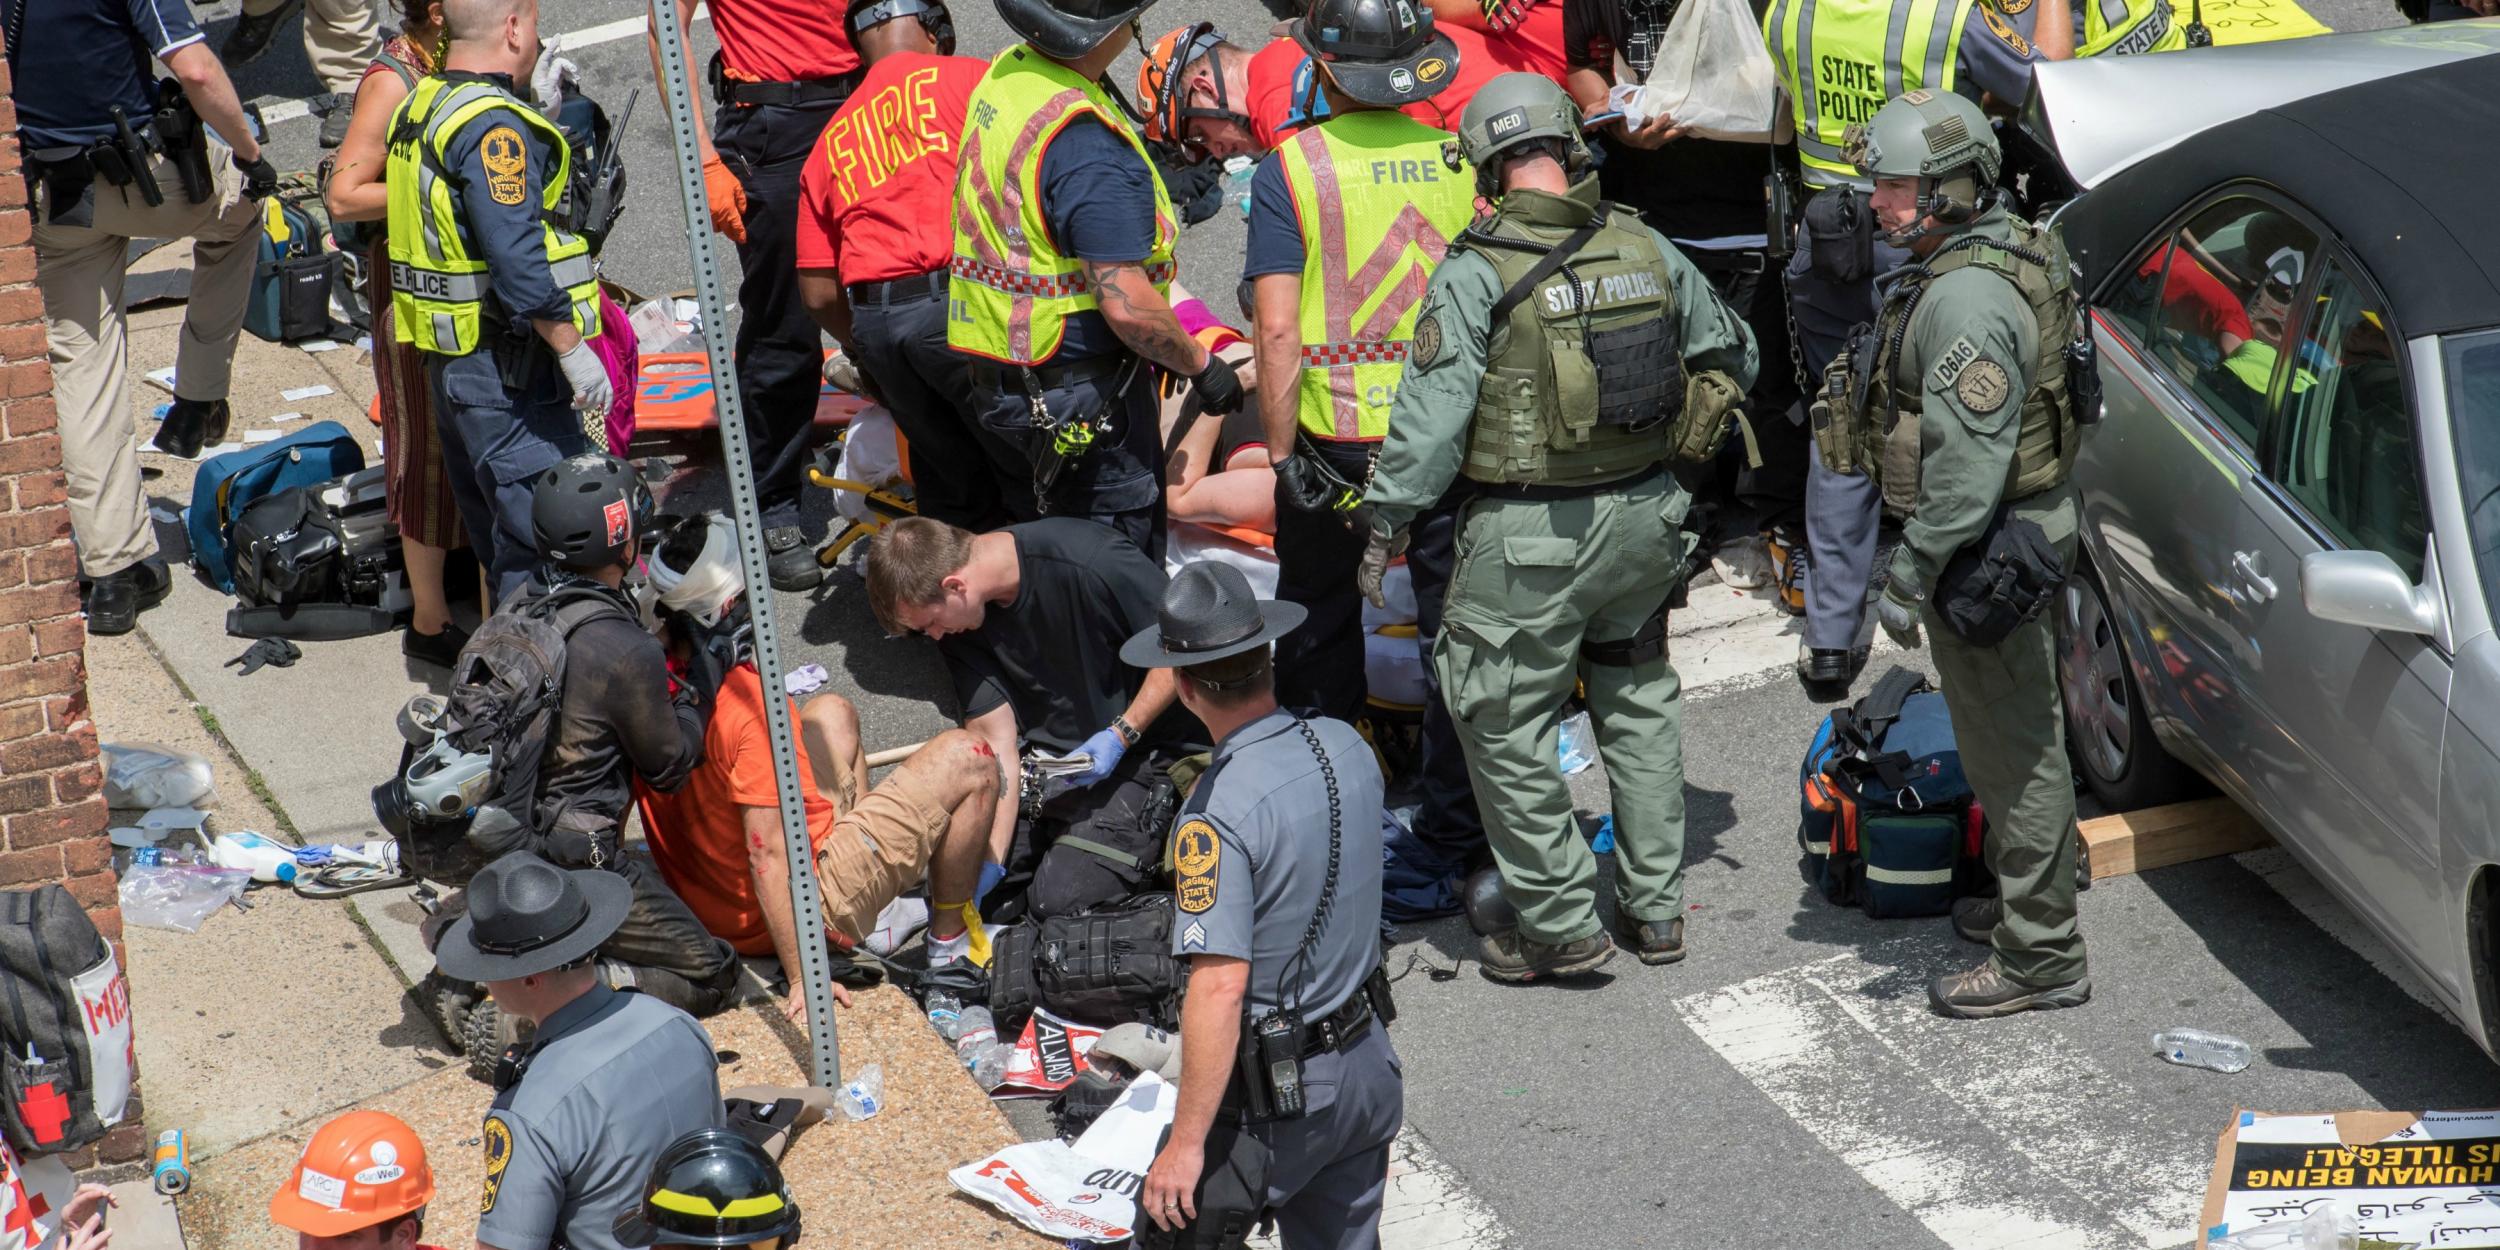 People receive first-aid after a car ran into a crowd of protesters in Charlottesville